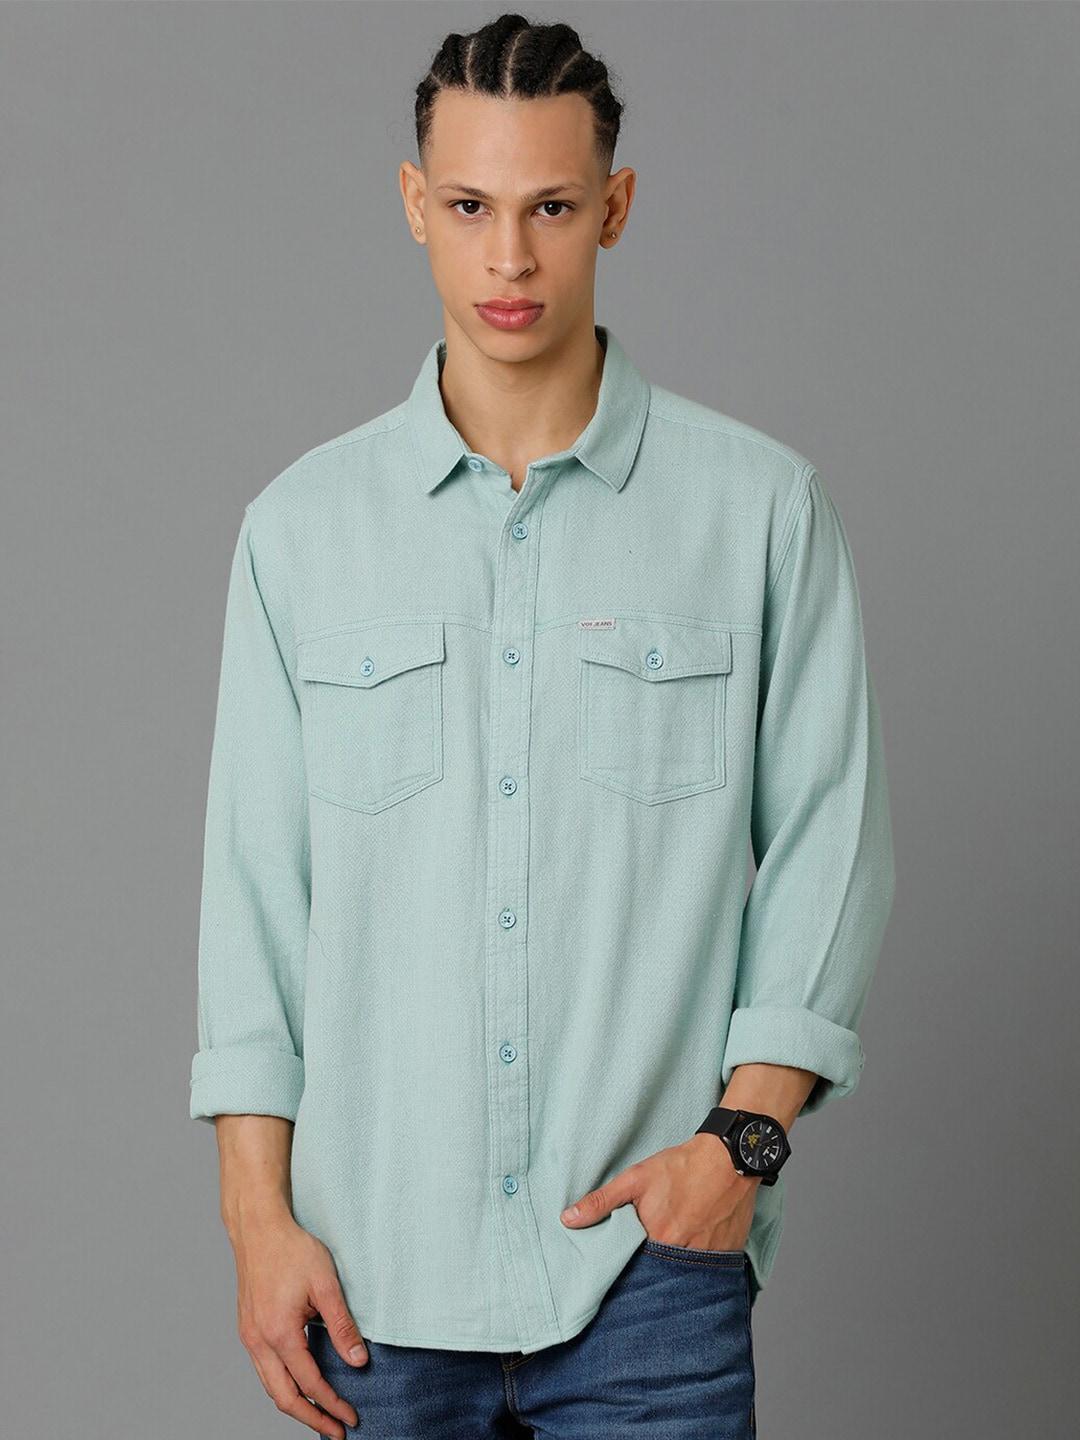 Voi Jeans Slim Fit Casual Shirt